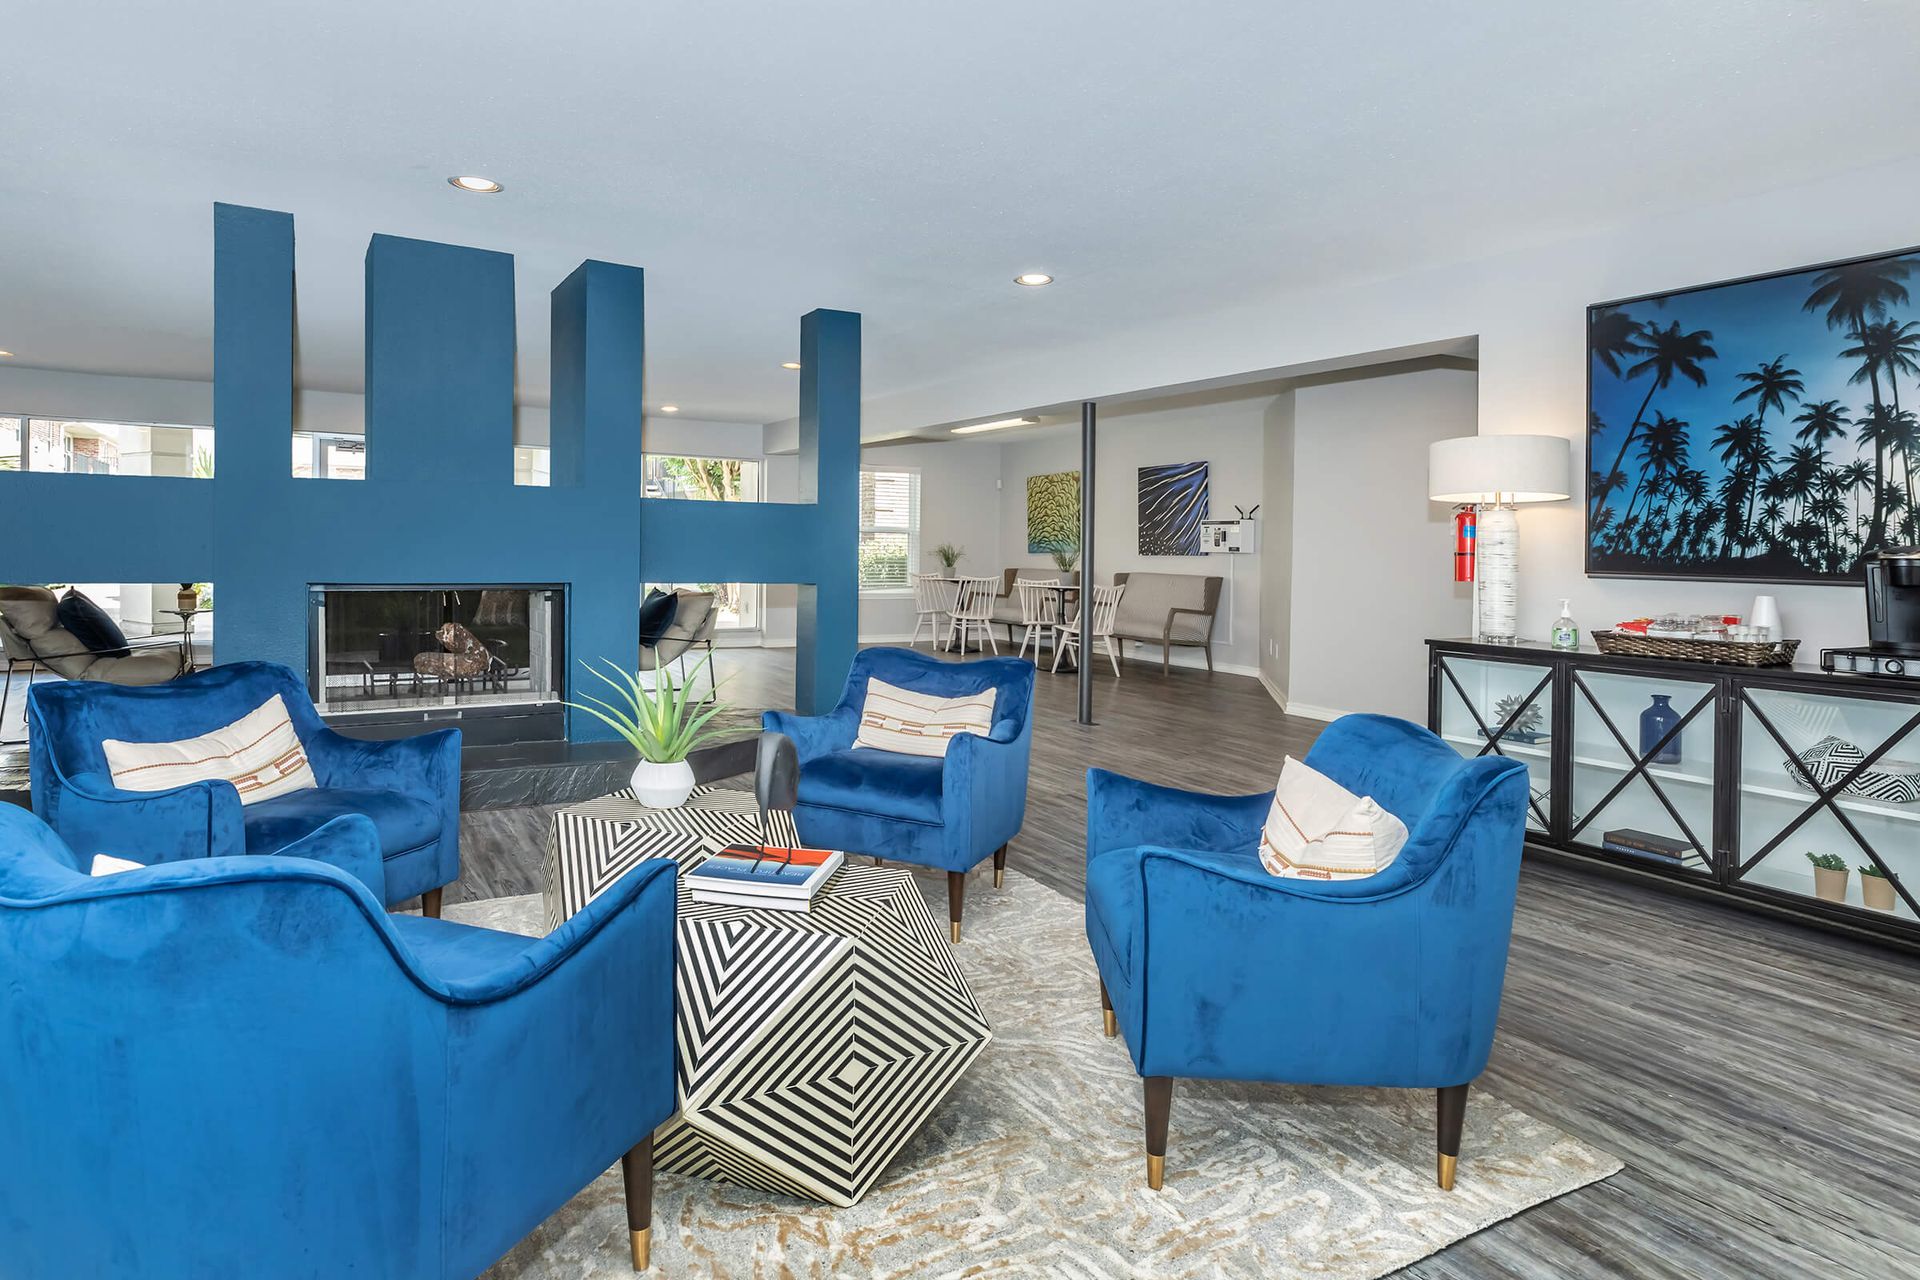 A room with blue chairs, a coffee table, and a fireplace at Baystone Apartments in Webster, TX.